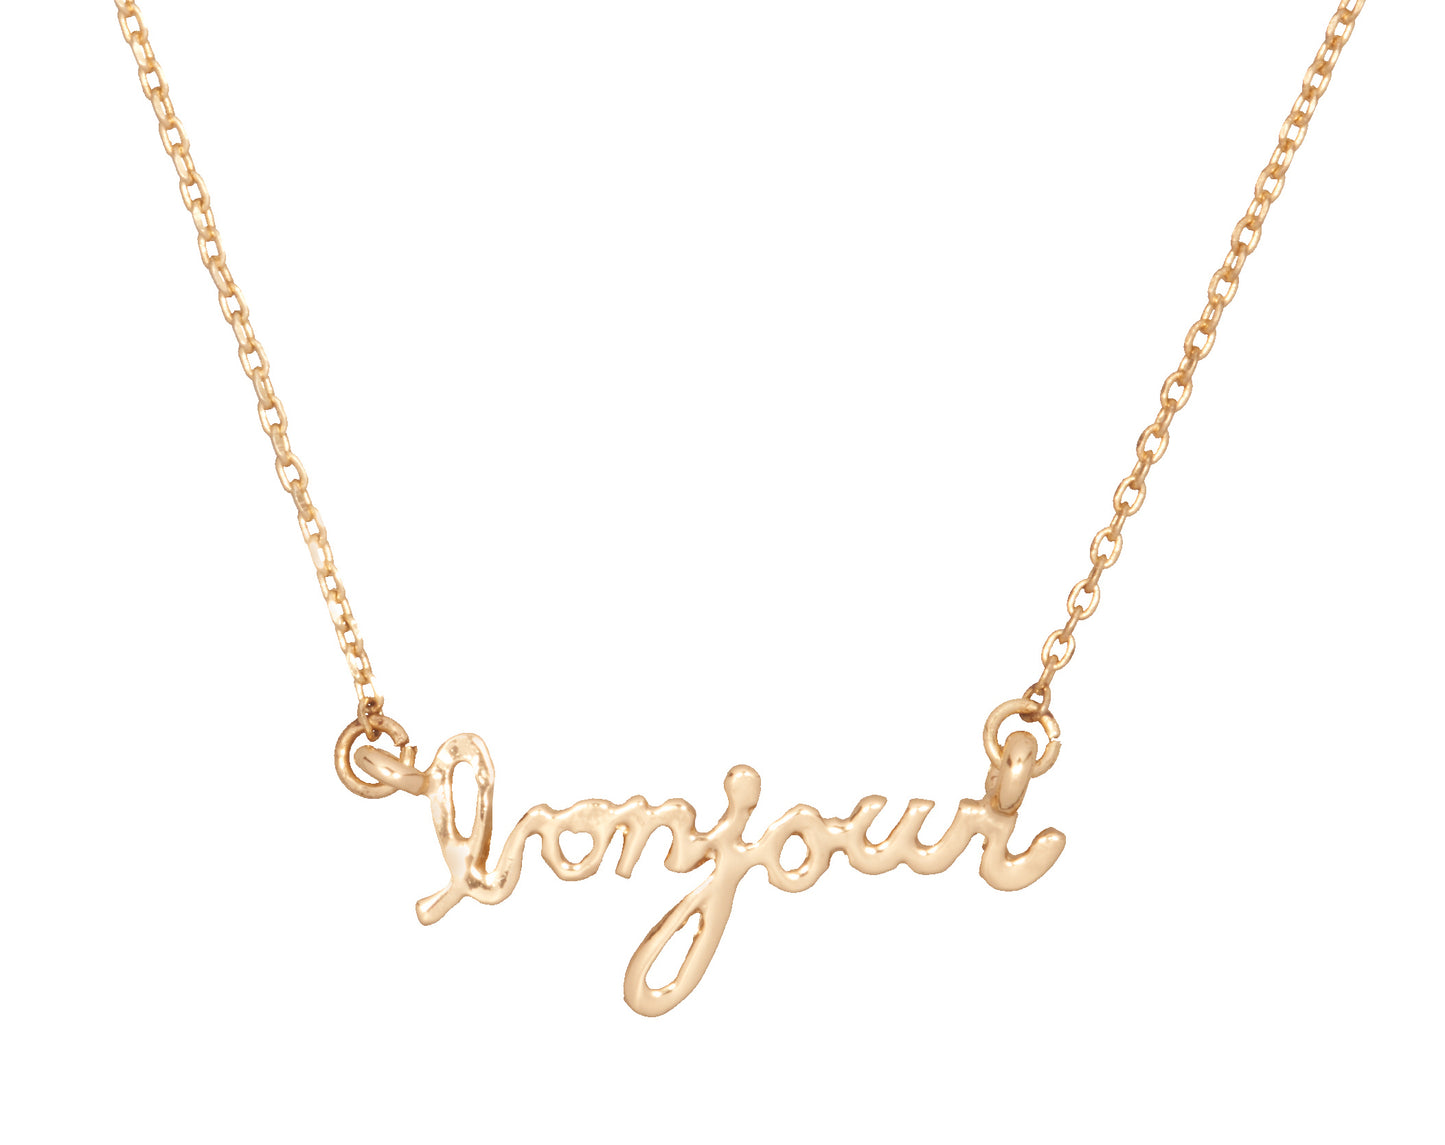 'Bonjour' Delicate Word Necklace